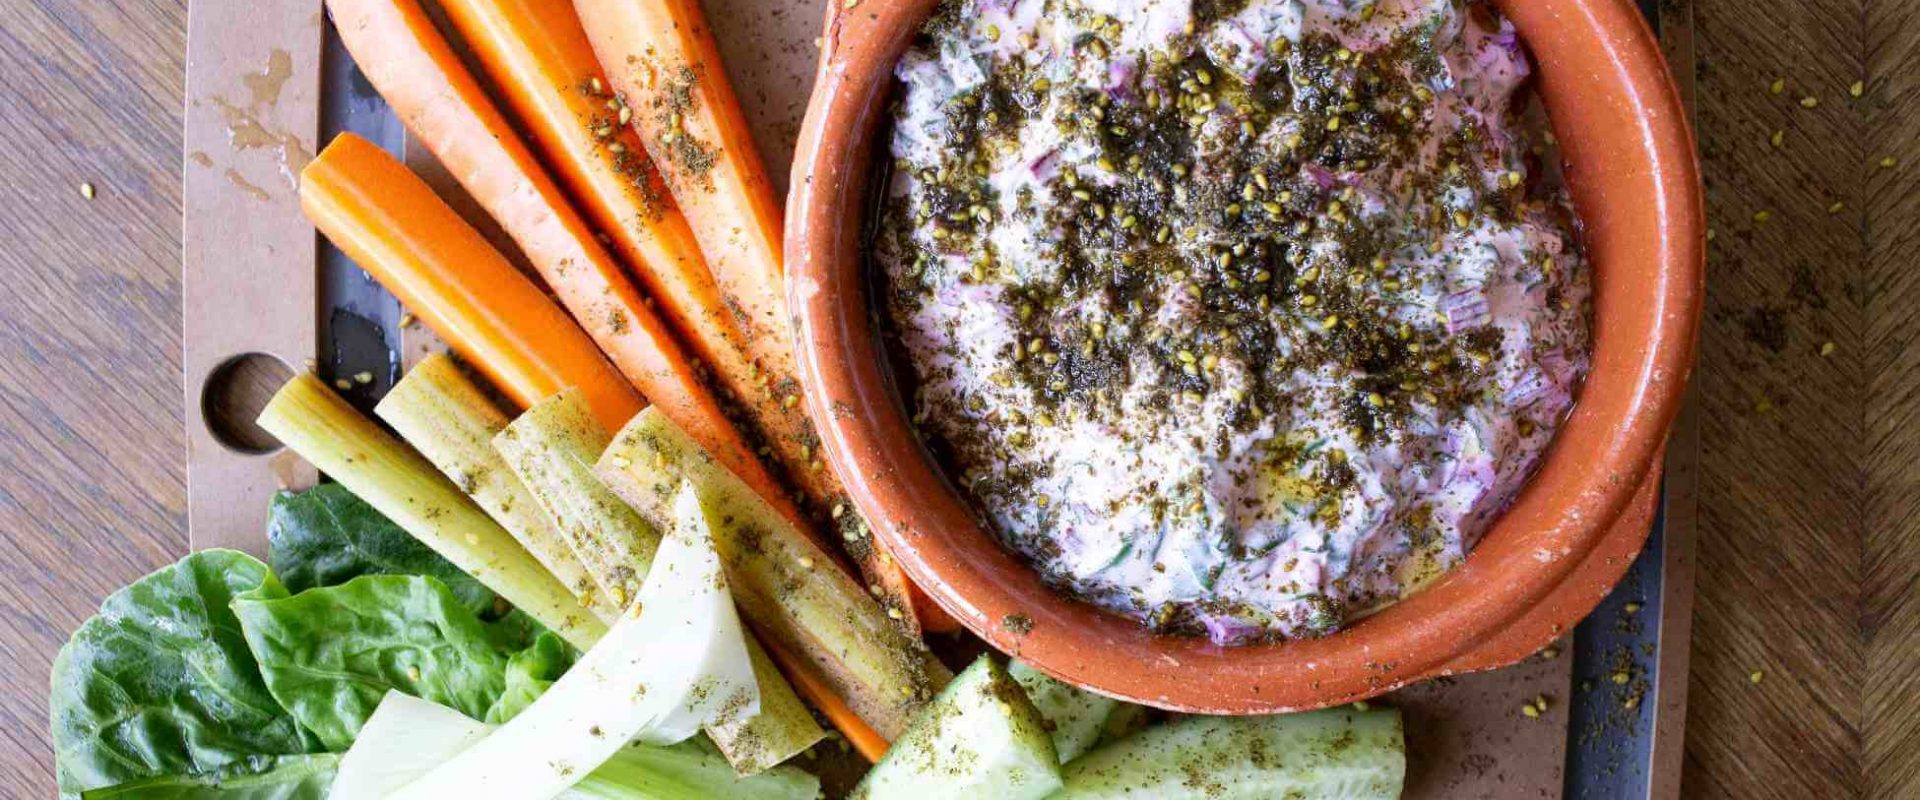 How To Make Your Beetroot Leaves Into a Delicious Dip